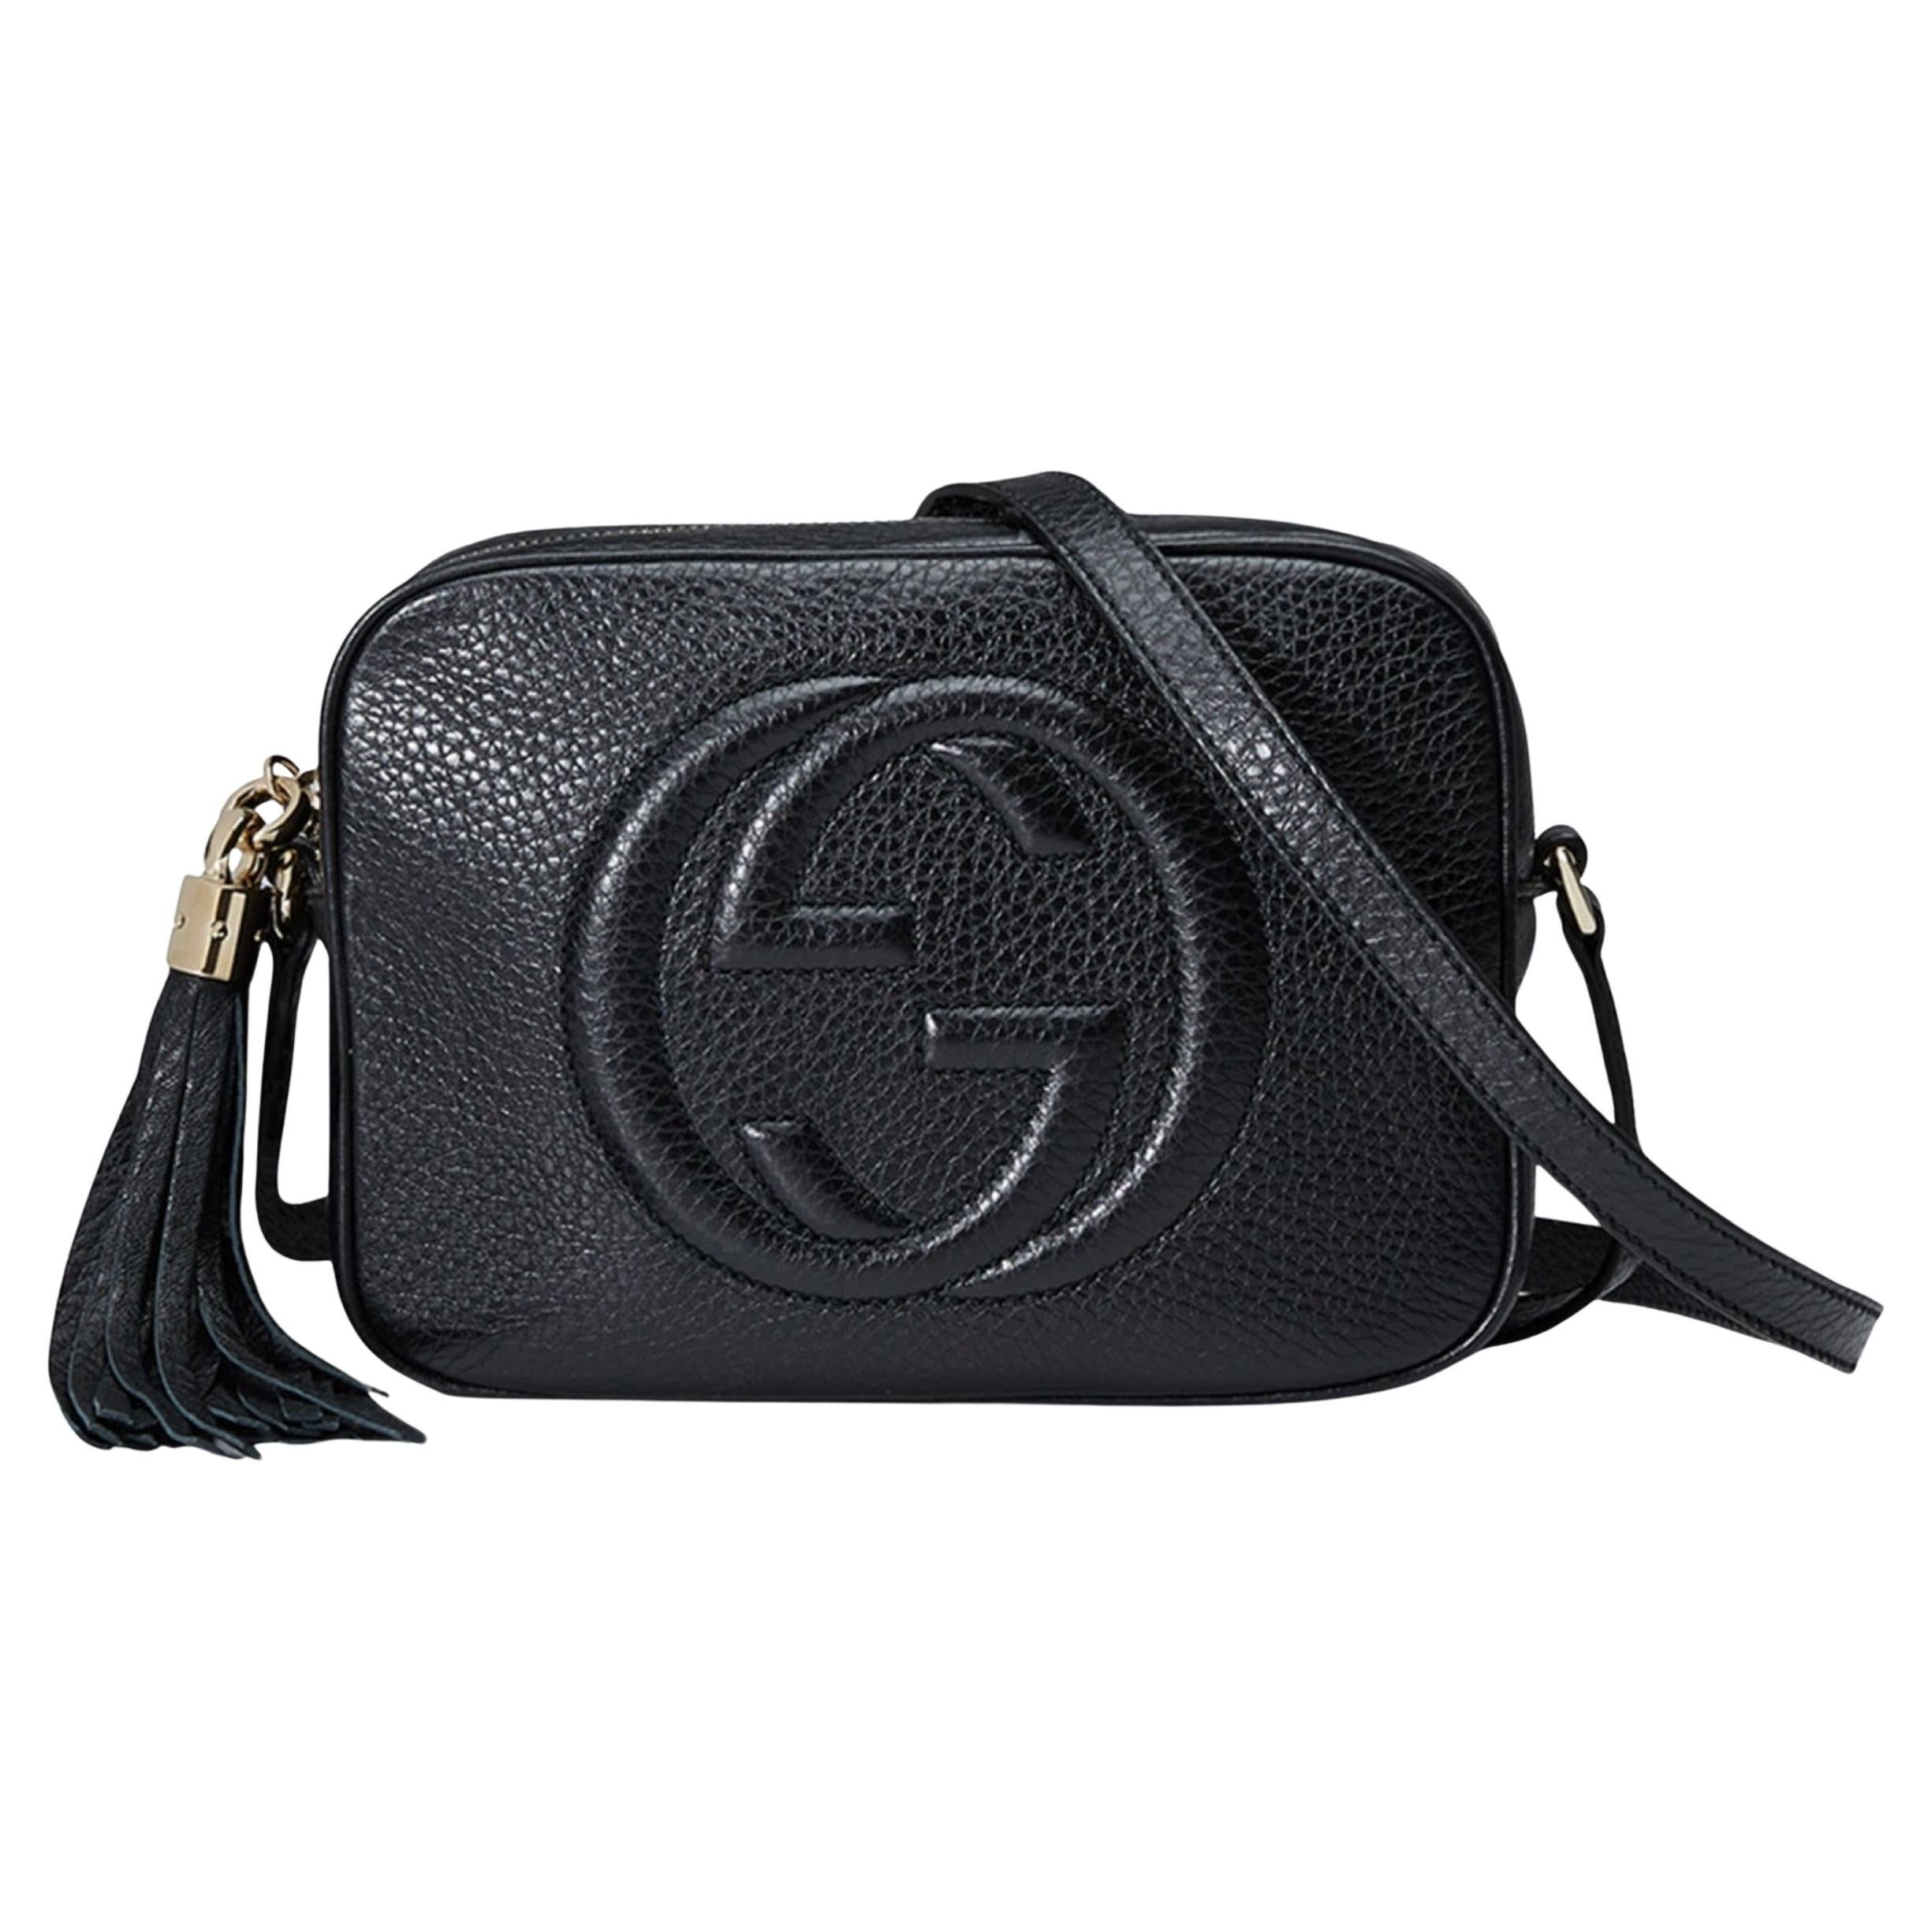 NEW Gucci Black Small Soho Disco Leather Crossbody Bag For Sale